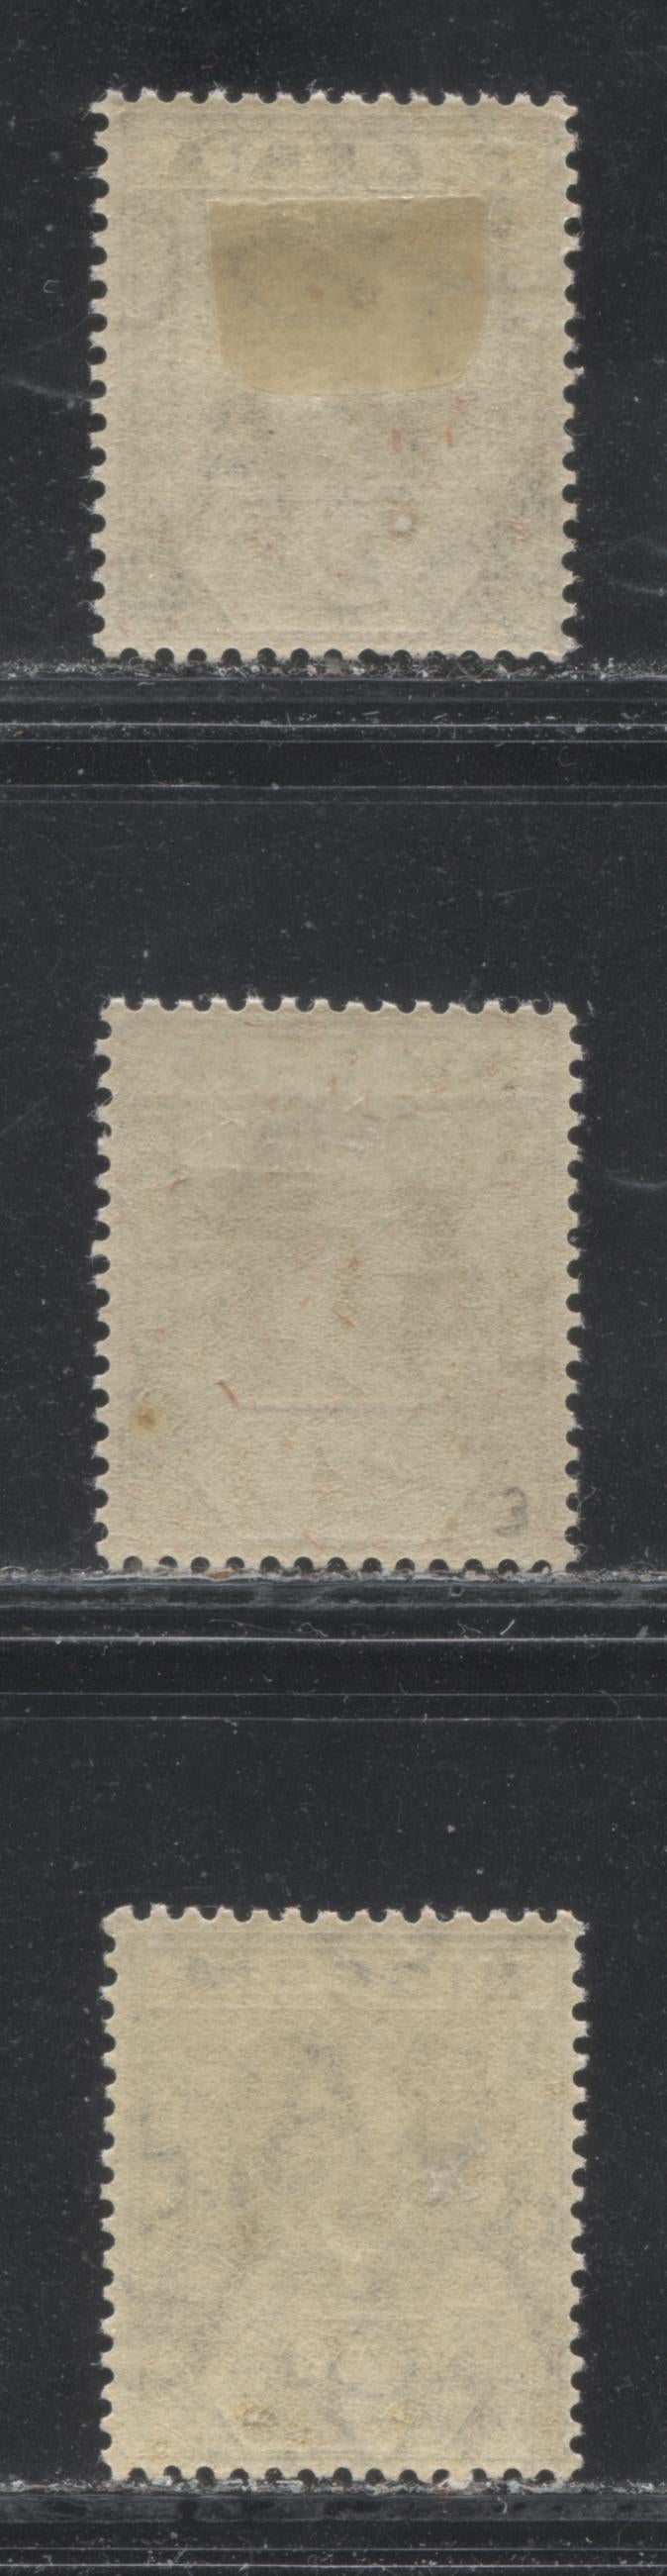 Lot 181 Nigeria SG# 3a 2d Slate Grey King George V, 1914-1921 Multiple Crown CA Imperium Keyplate Issue, Three VFOG Examples, From Different Printings, Each a Slightly Different Shade